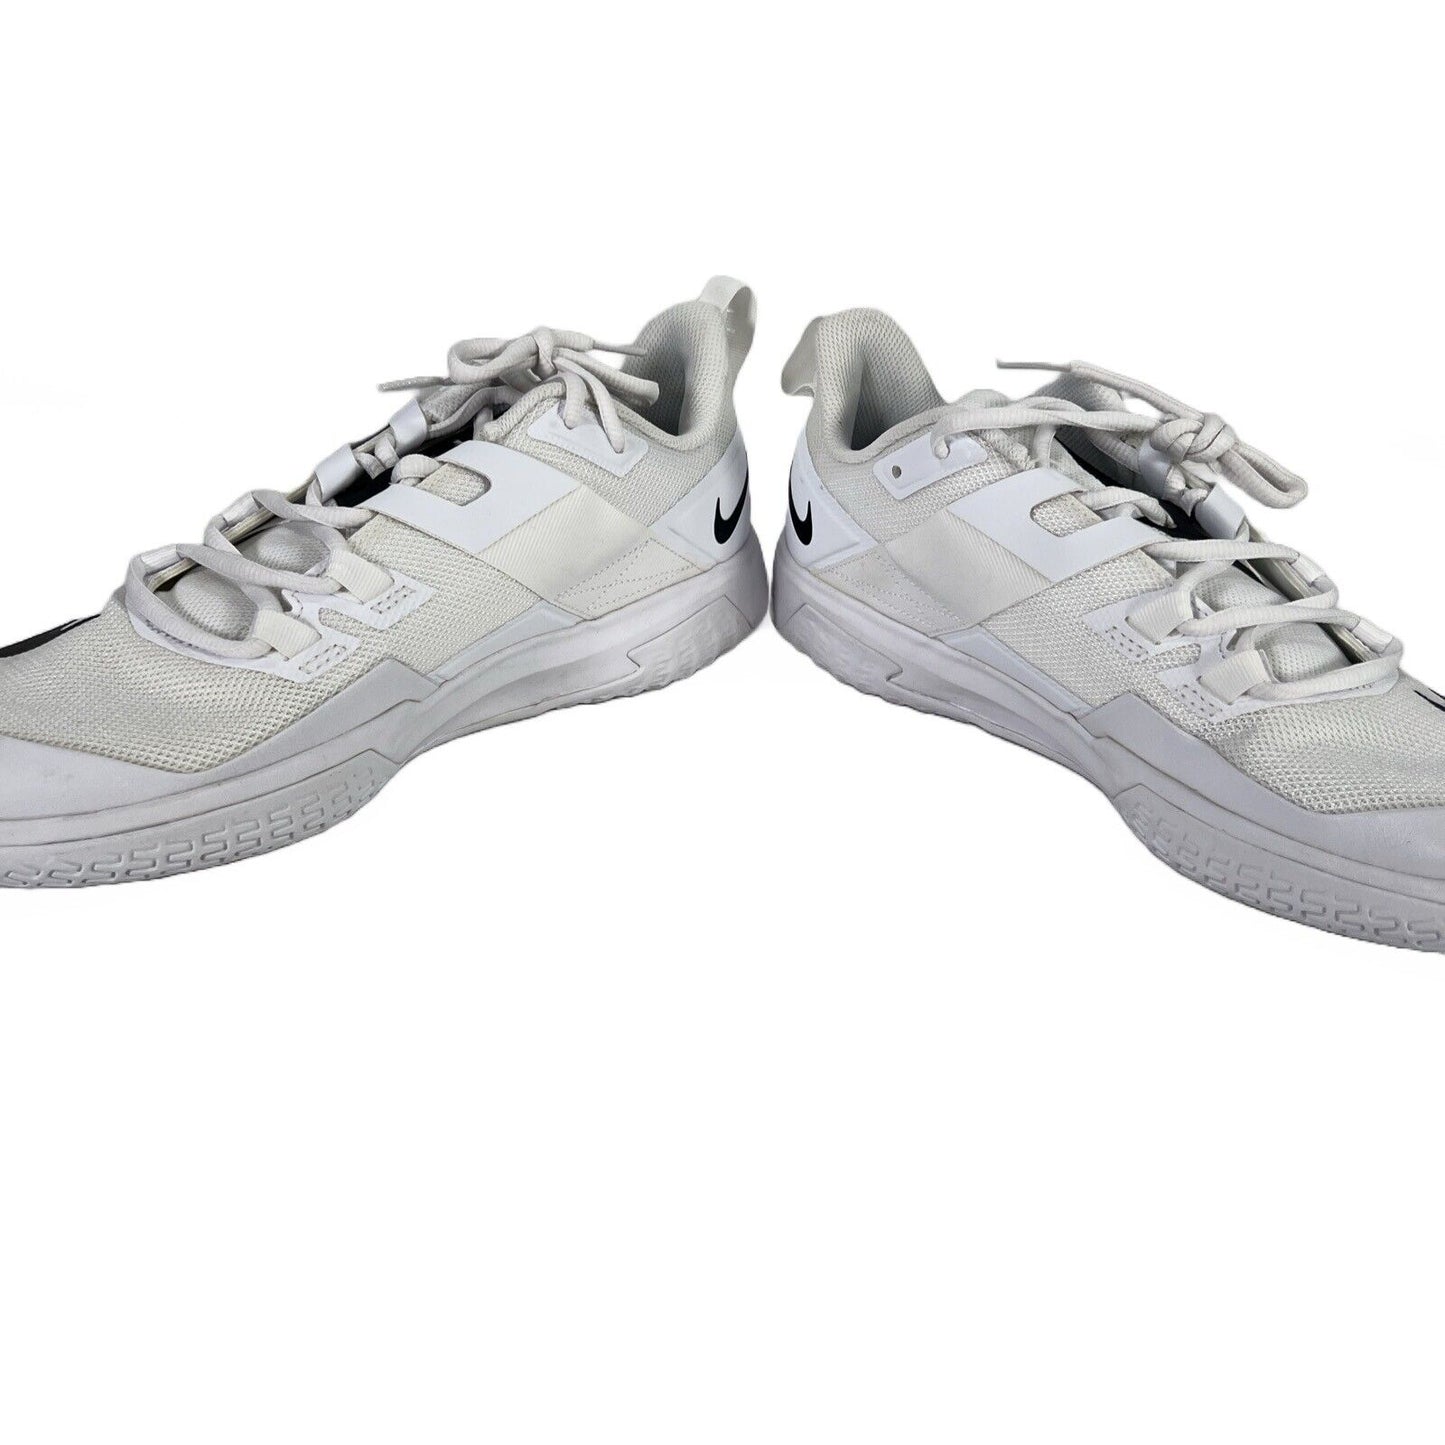 NEW Nike Men's White Vapor Lite HC Lace Up Athletic Sneakers - 10